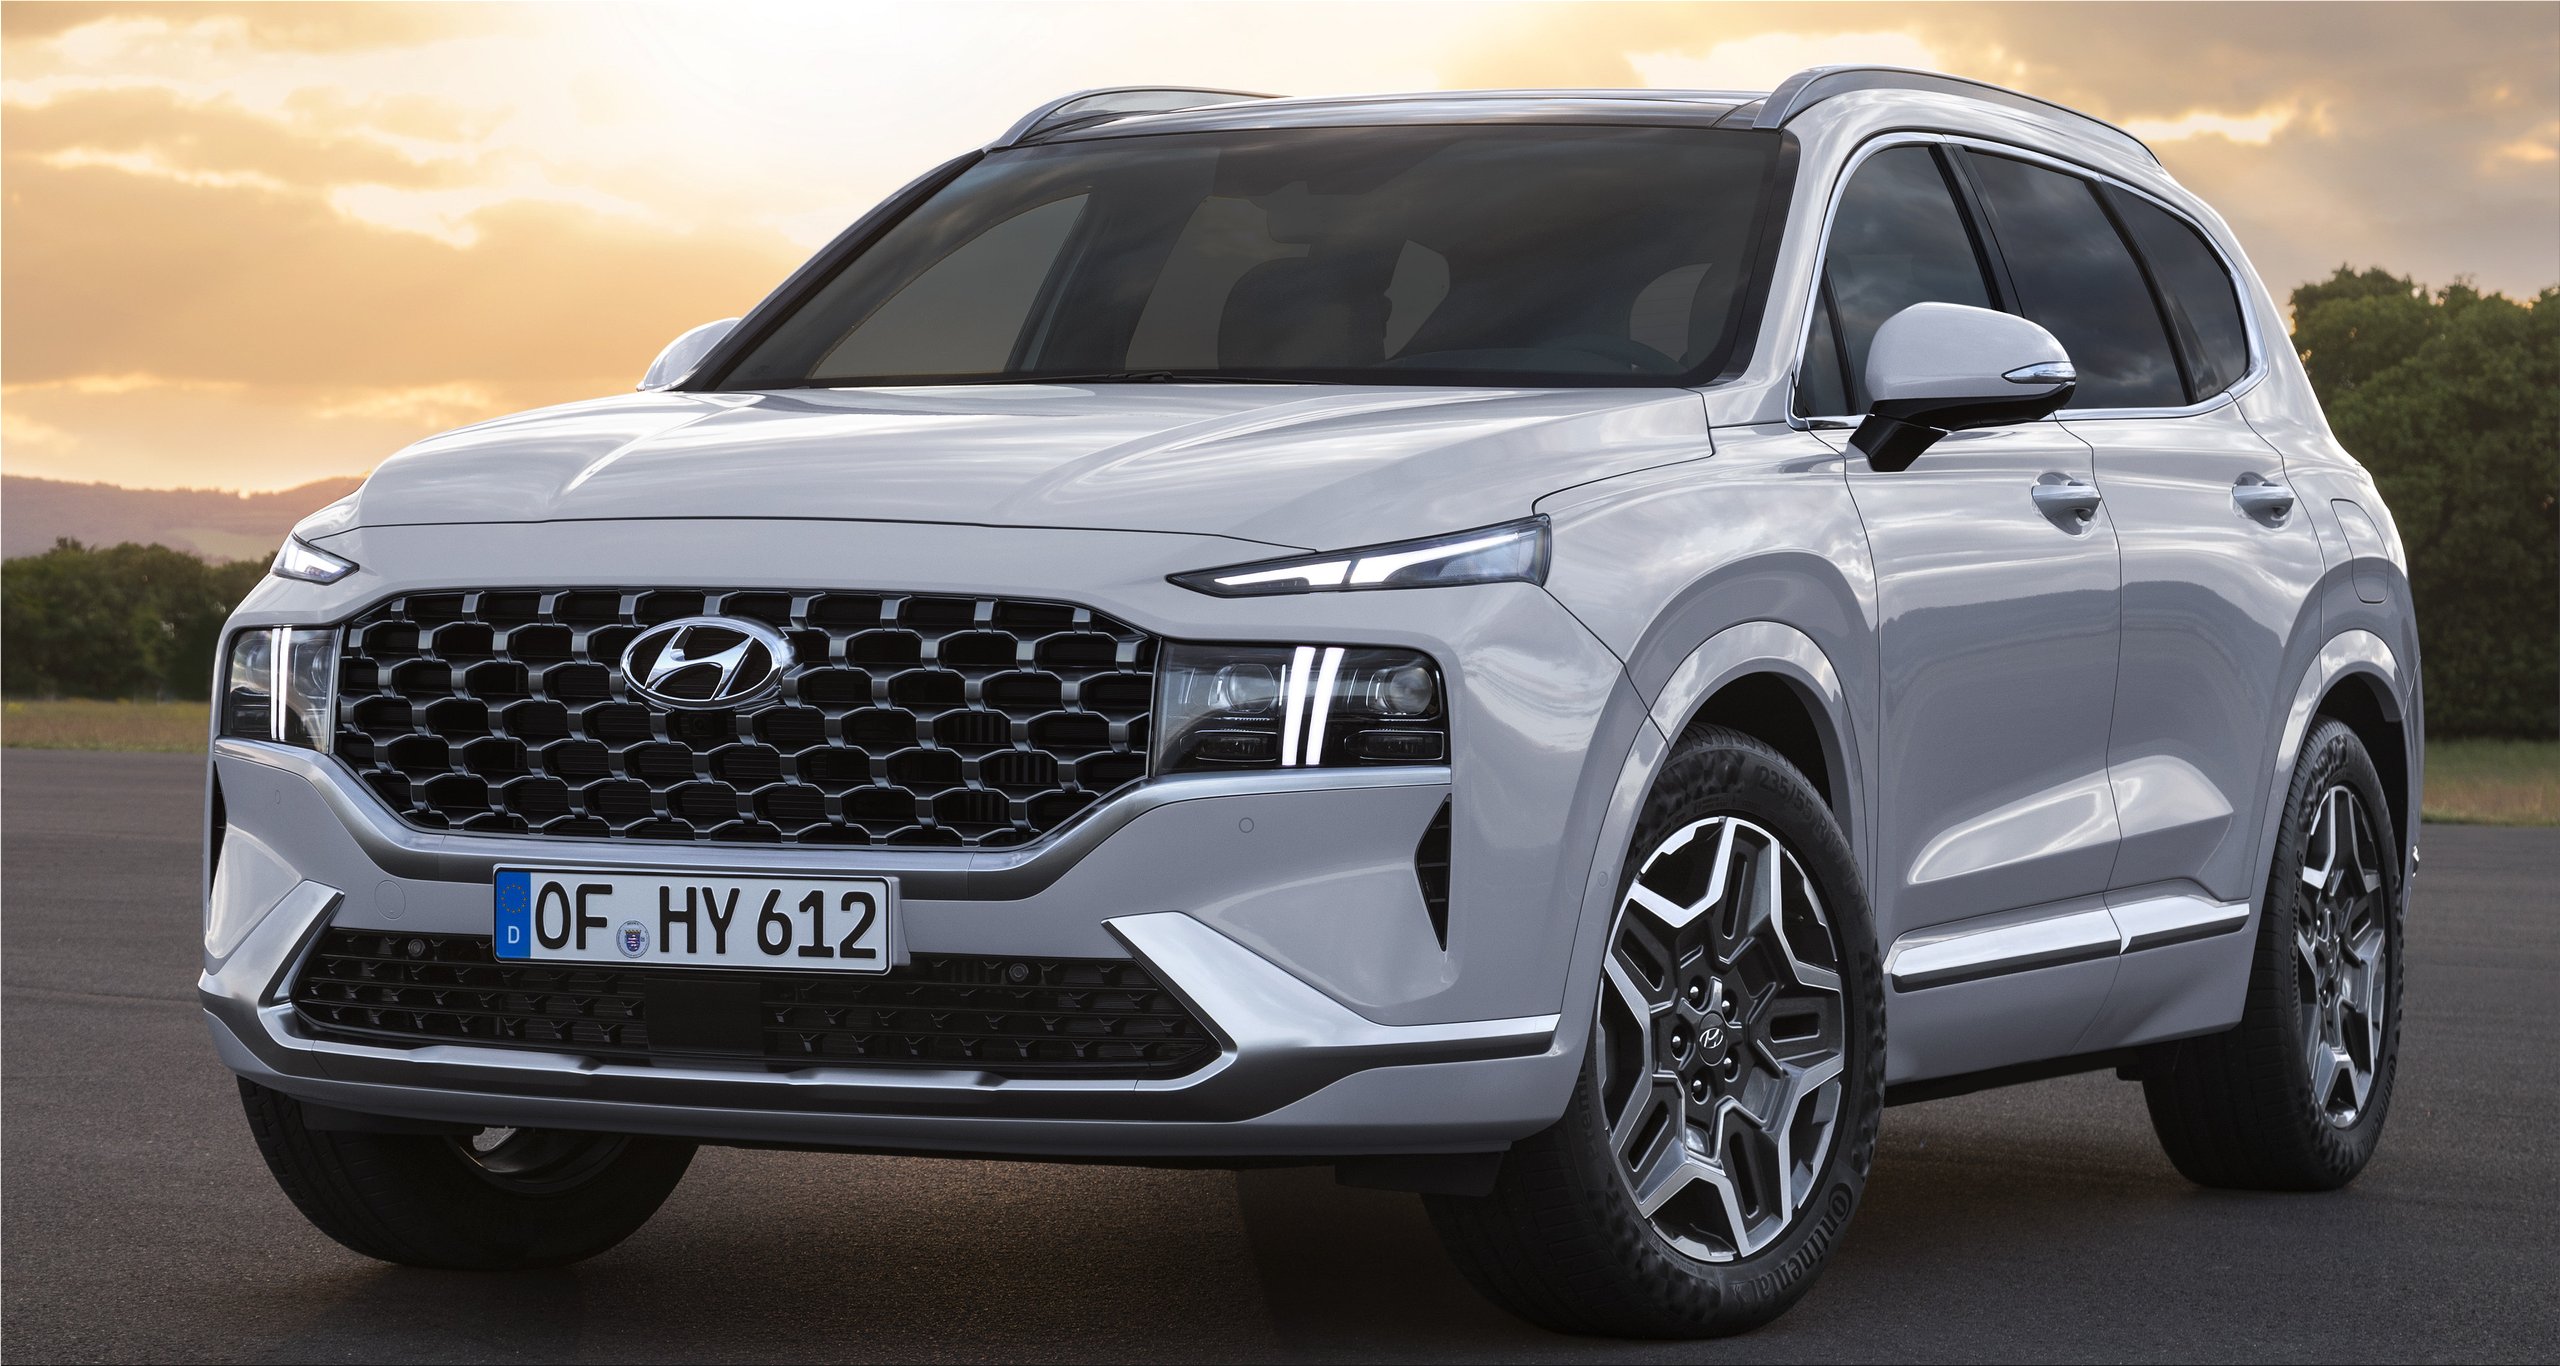 The new Hyundai Santa Fe gets bigger, smarter and rechargeable